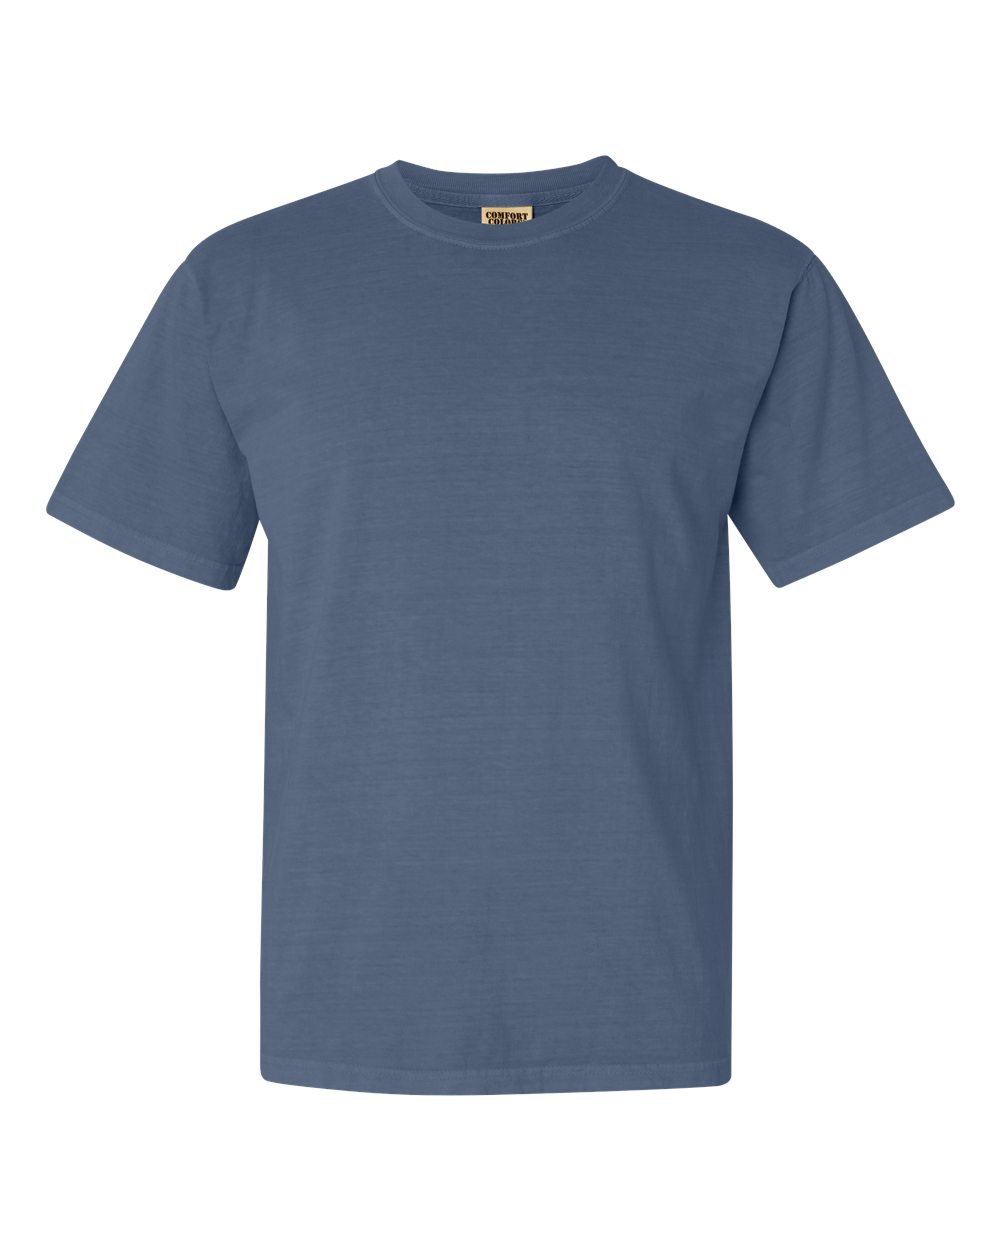 Comfort Colors Garment-Dyed Tee (1717) in Blue Jean